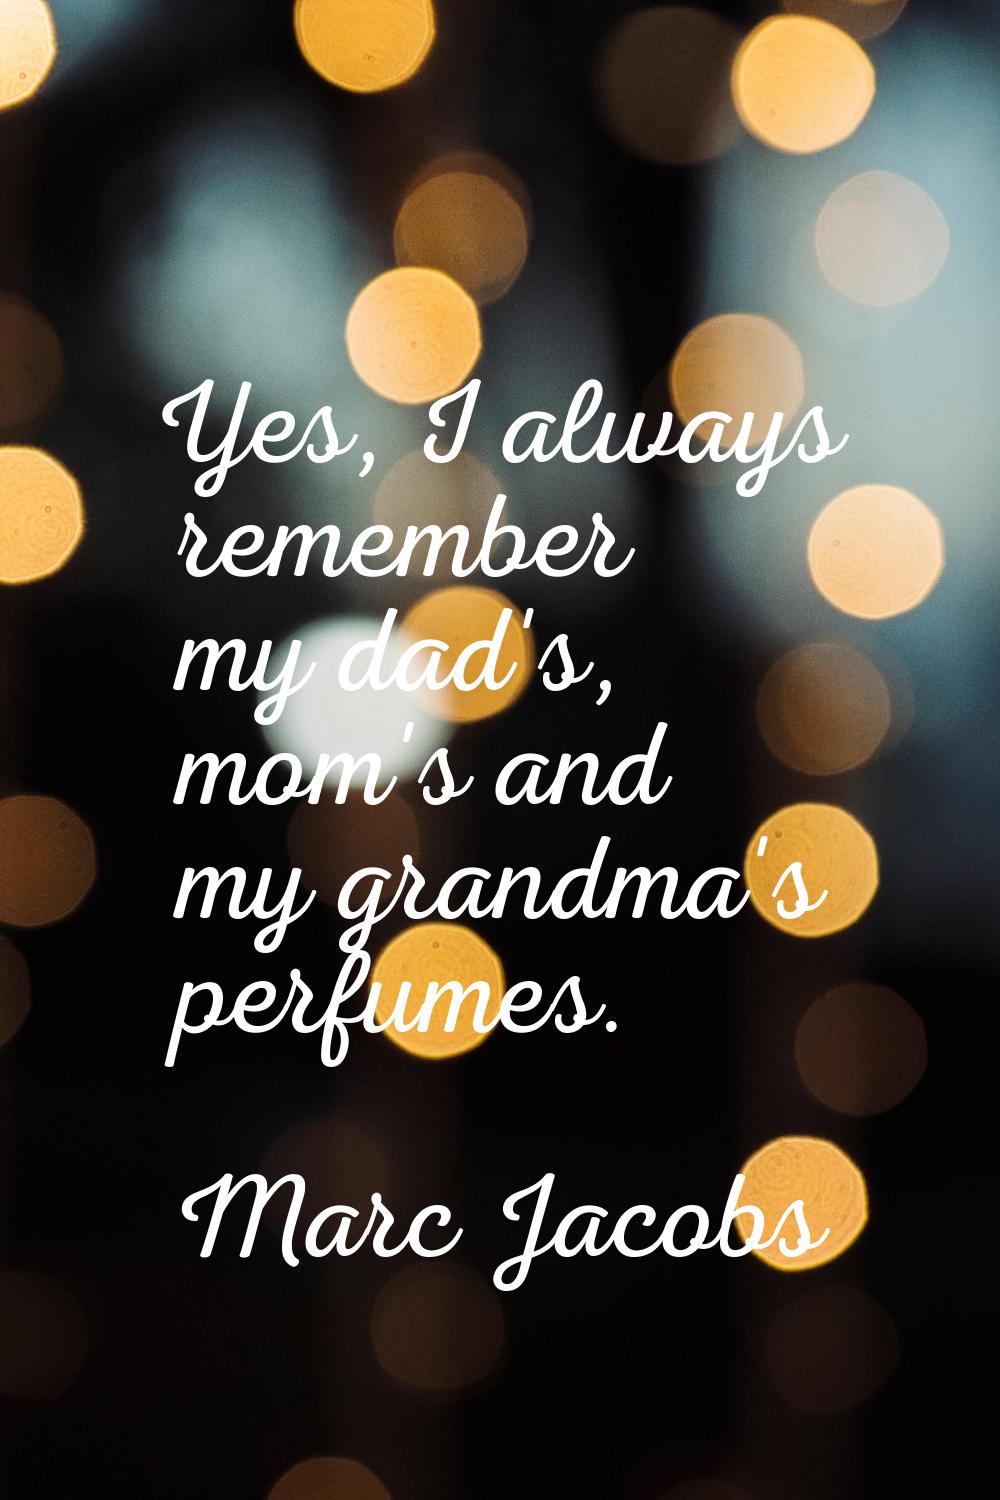 Yes, I always remember my dad's, mom's and my grandma's perfumes.